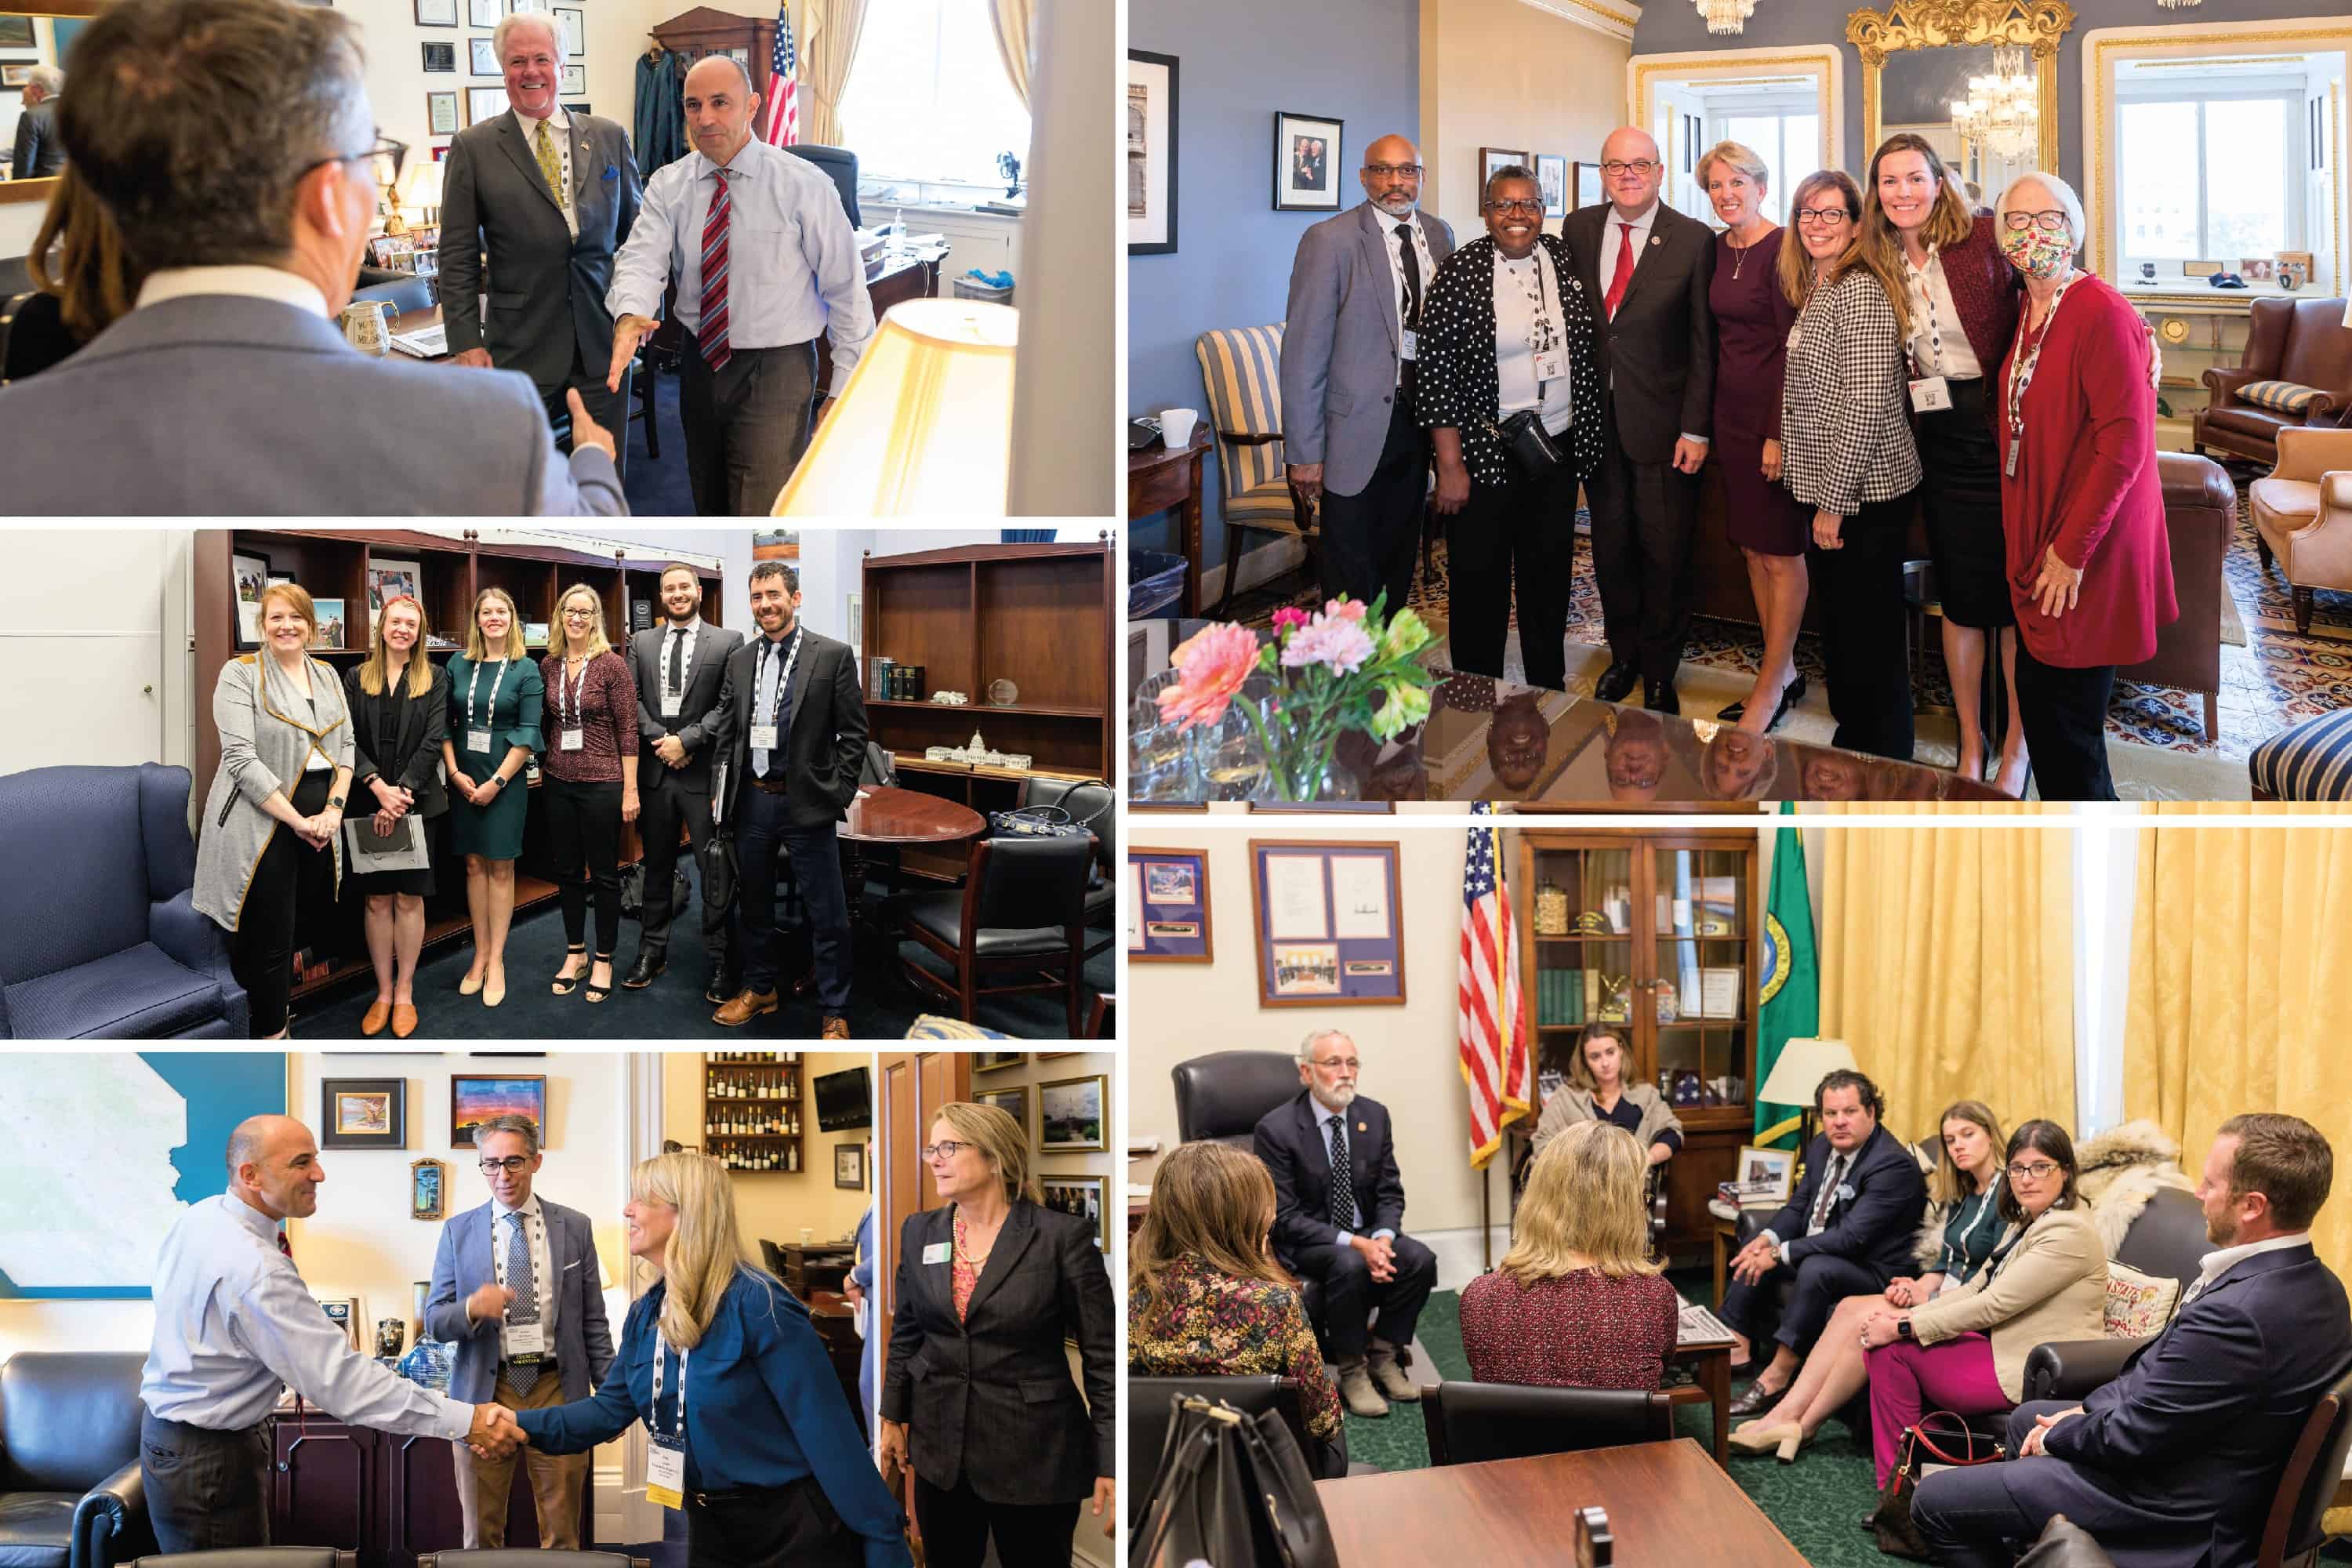 Collage of images of IFPA in Washington D.C.